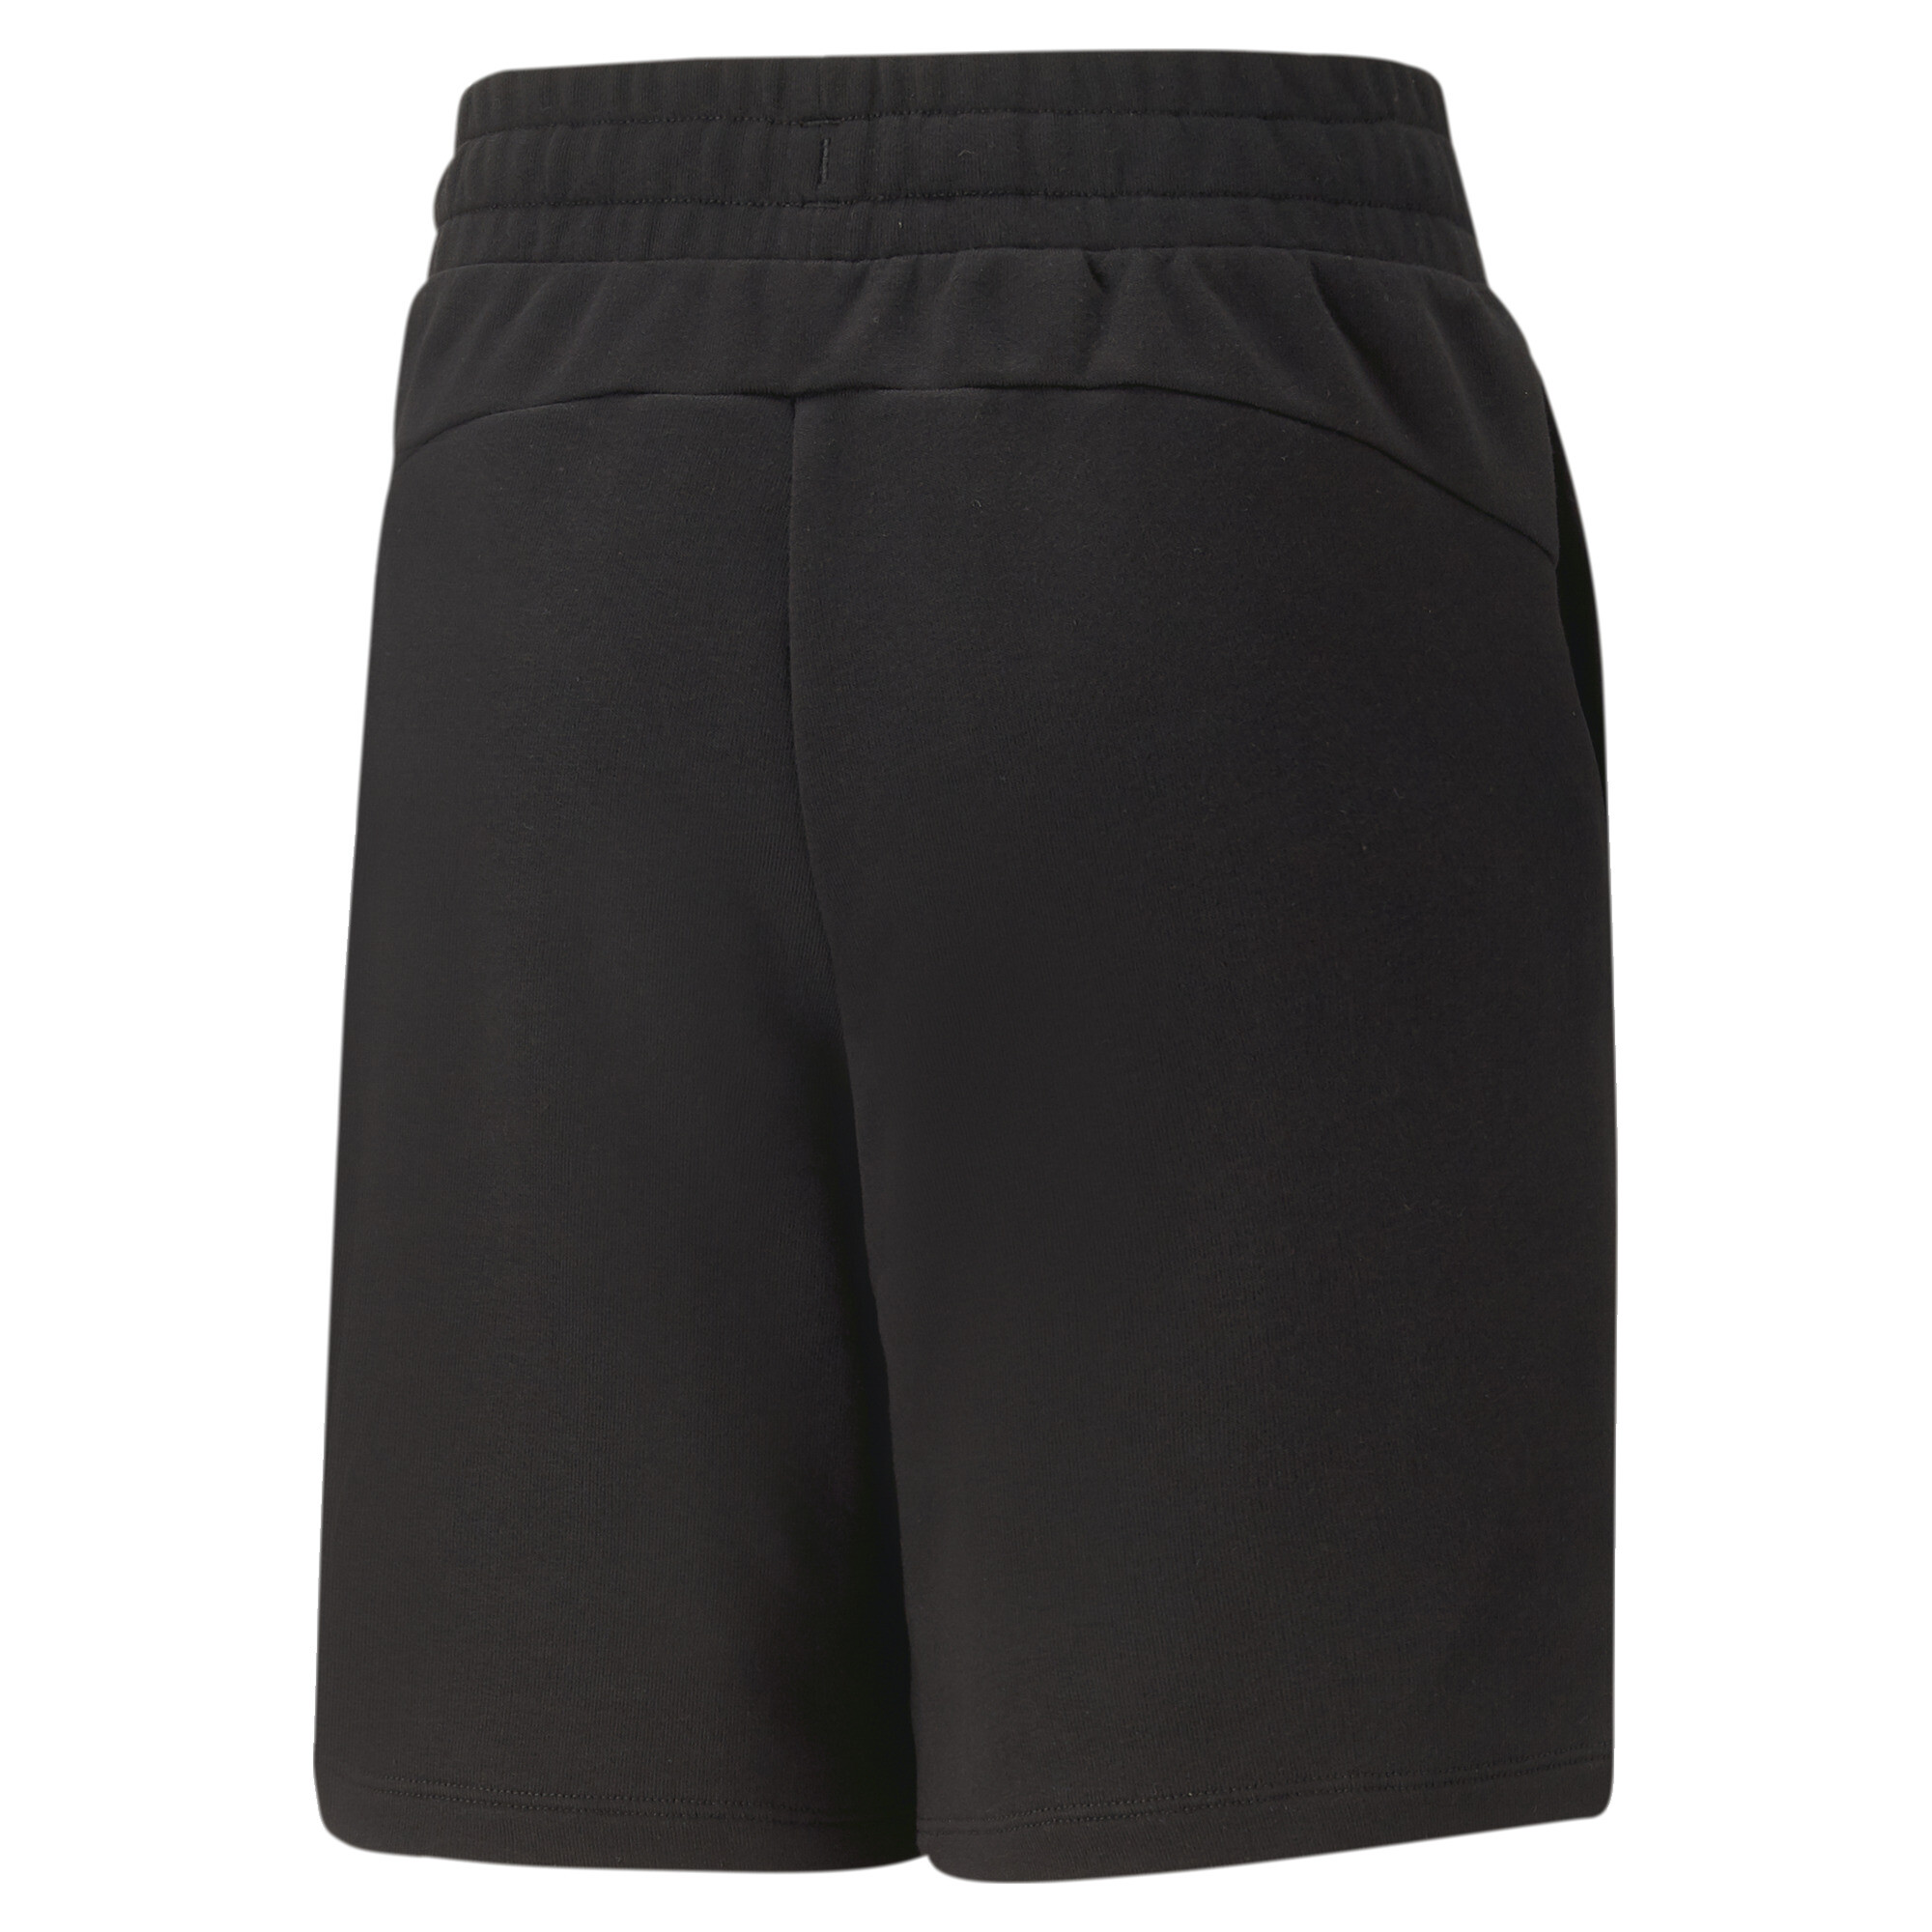 PUMA X MIRACULOUS Shorts In Black, Size 7-8 Youth